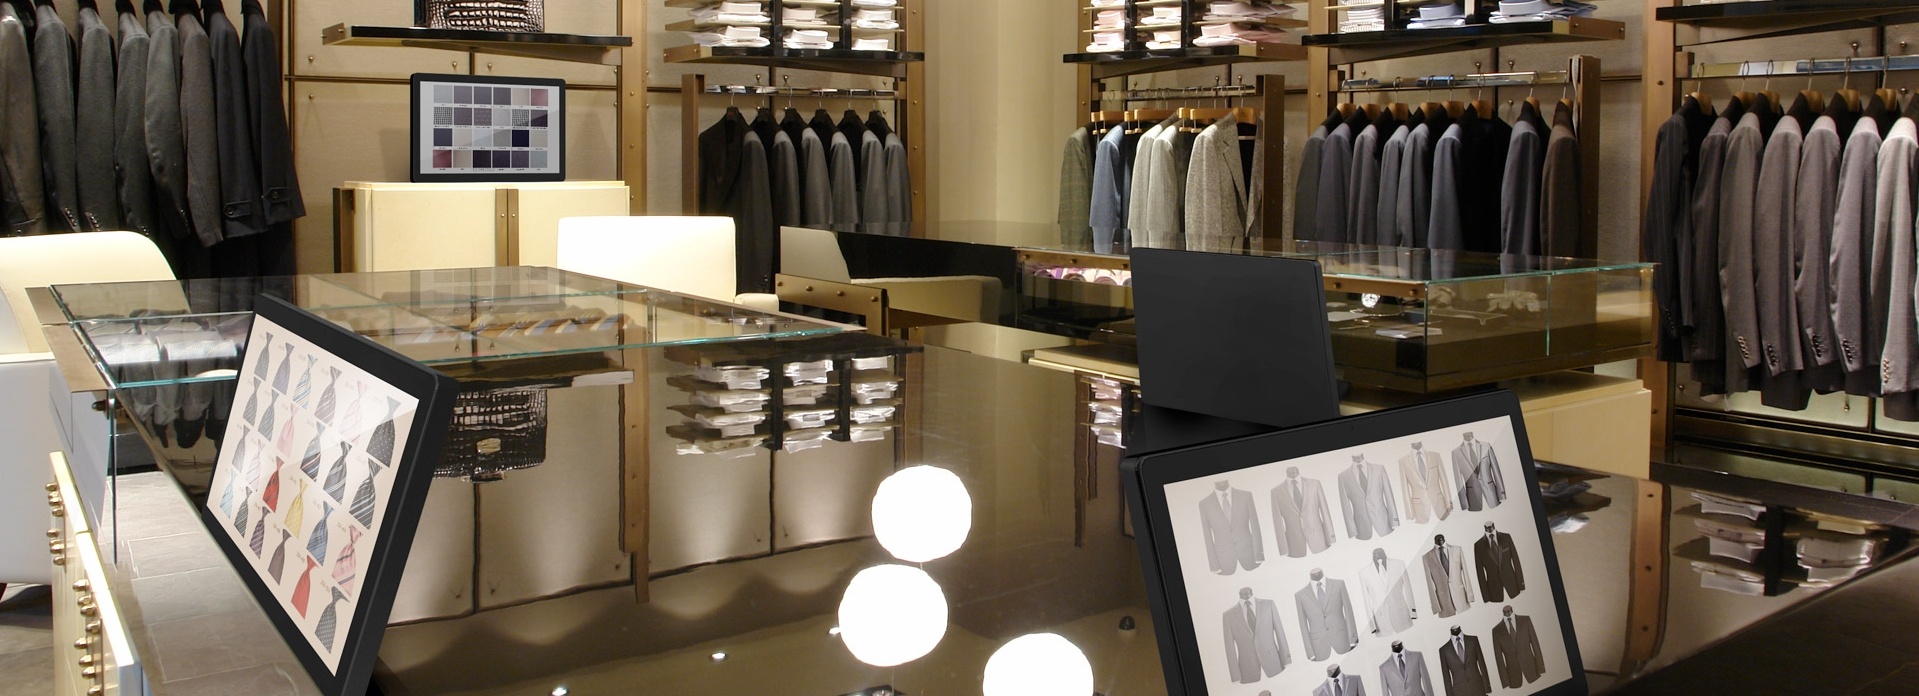 Men's Clothing Store Resource POS systems Online In-Store Interactive Digital Signage